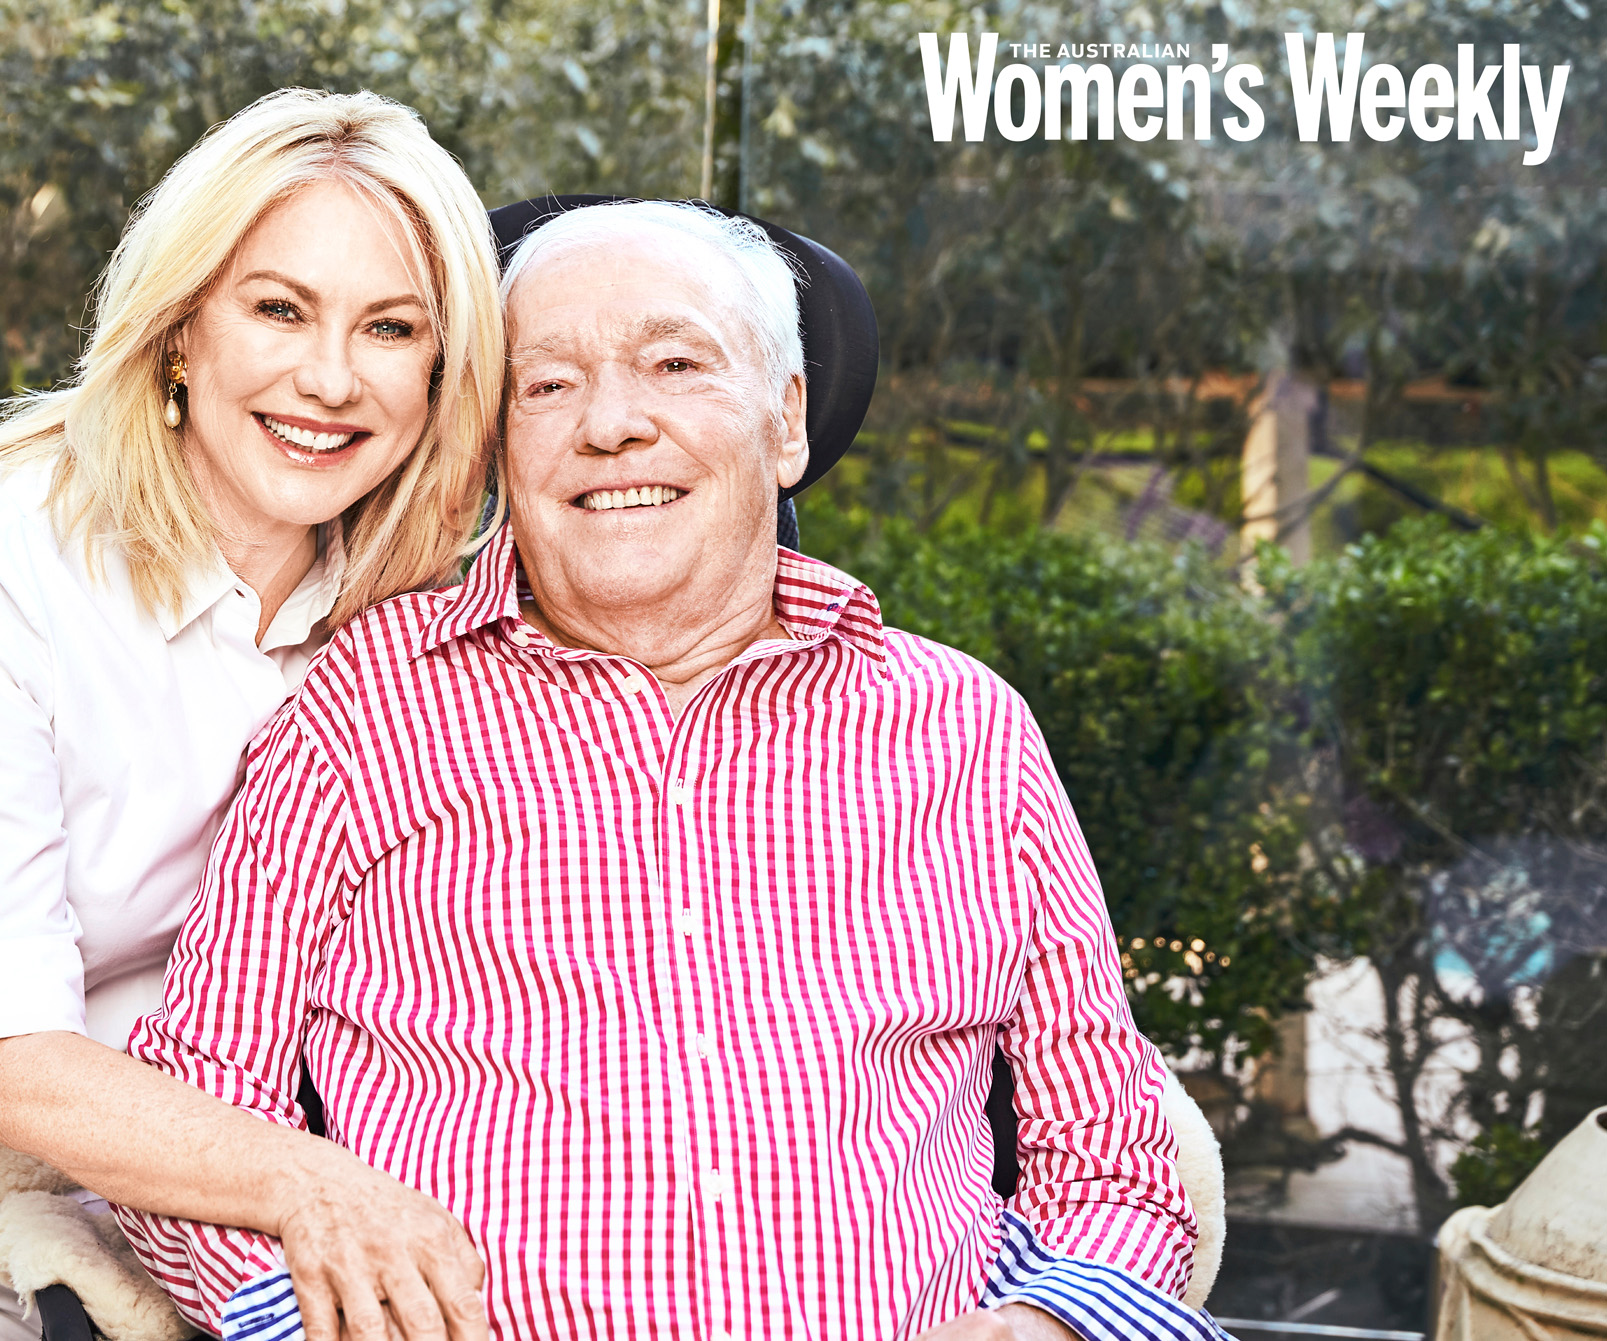 Kerri-Anne Kennerley confirms her husband John Kennerley has died: “You were the love of my life”